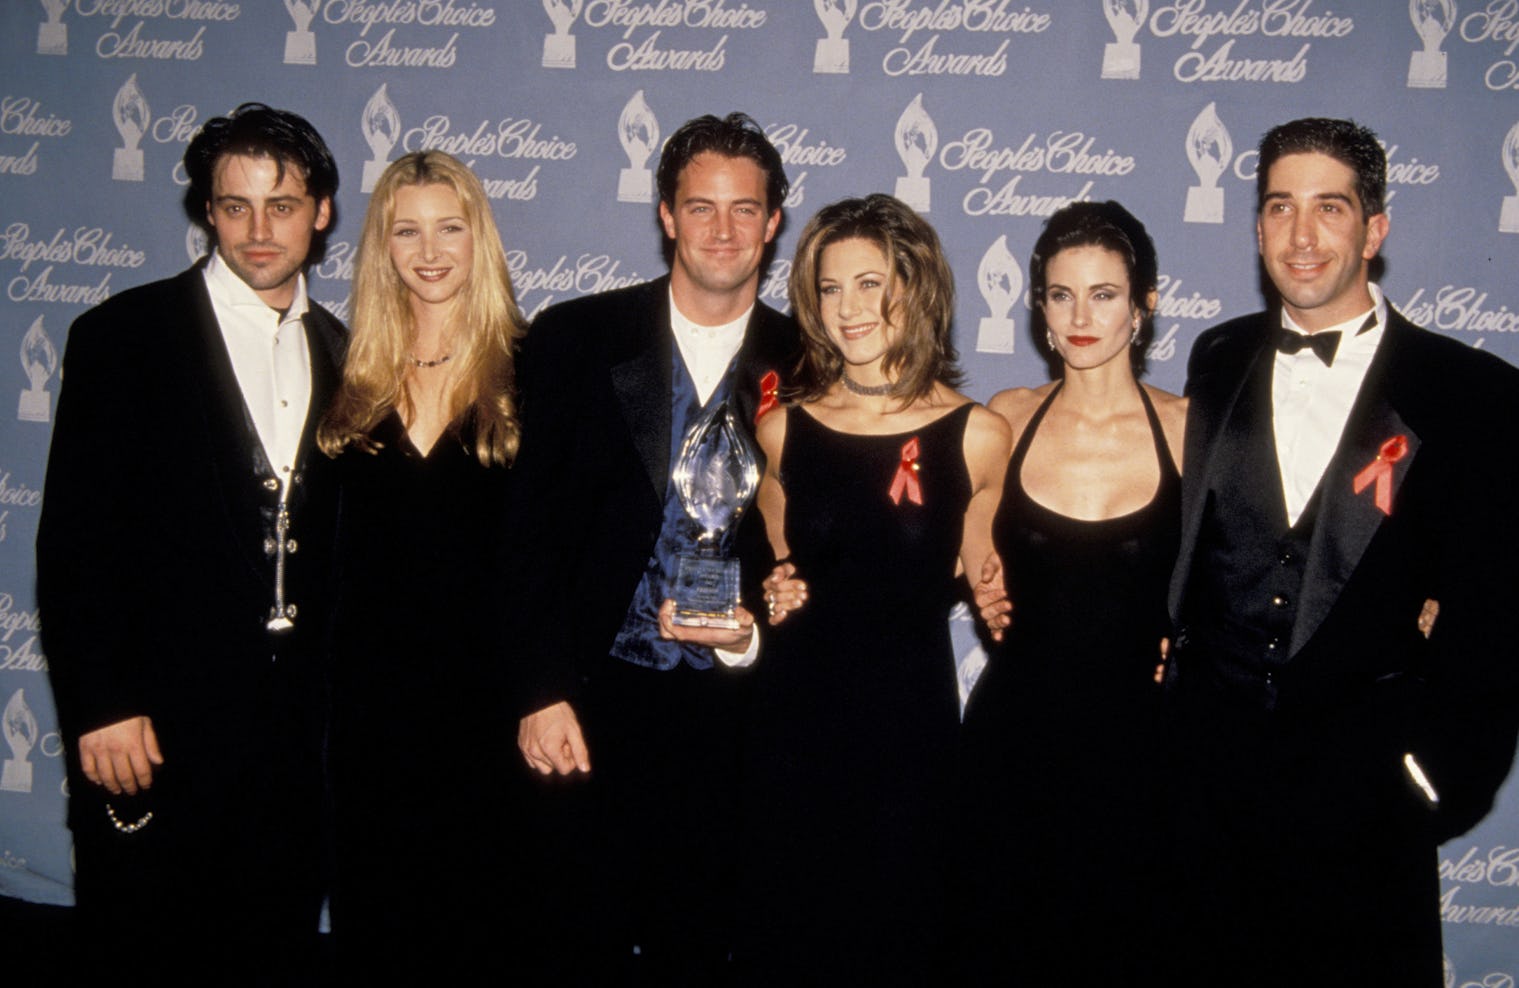 'Friends' Cast Net Worth How Much Were They Paid Per Episode & For Reruns?